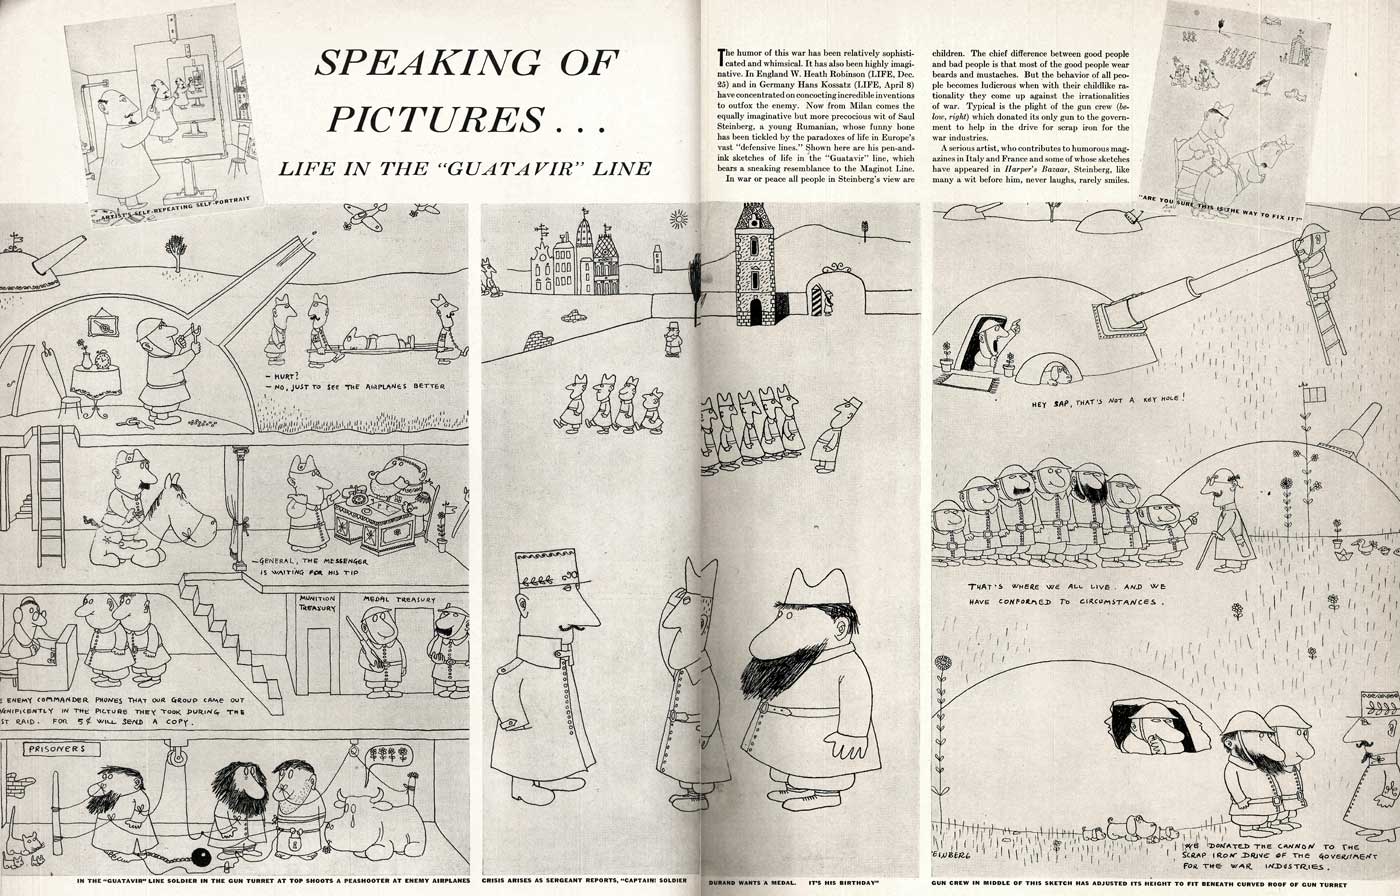 Two pages from “Speaking of Pictures: Life in the Guatavir Line,” LIFE, May 27, 1940.